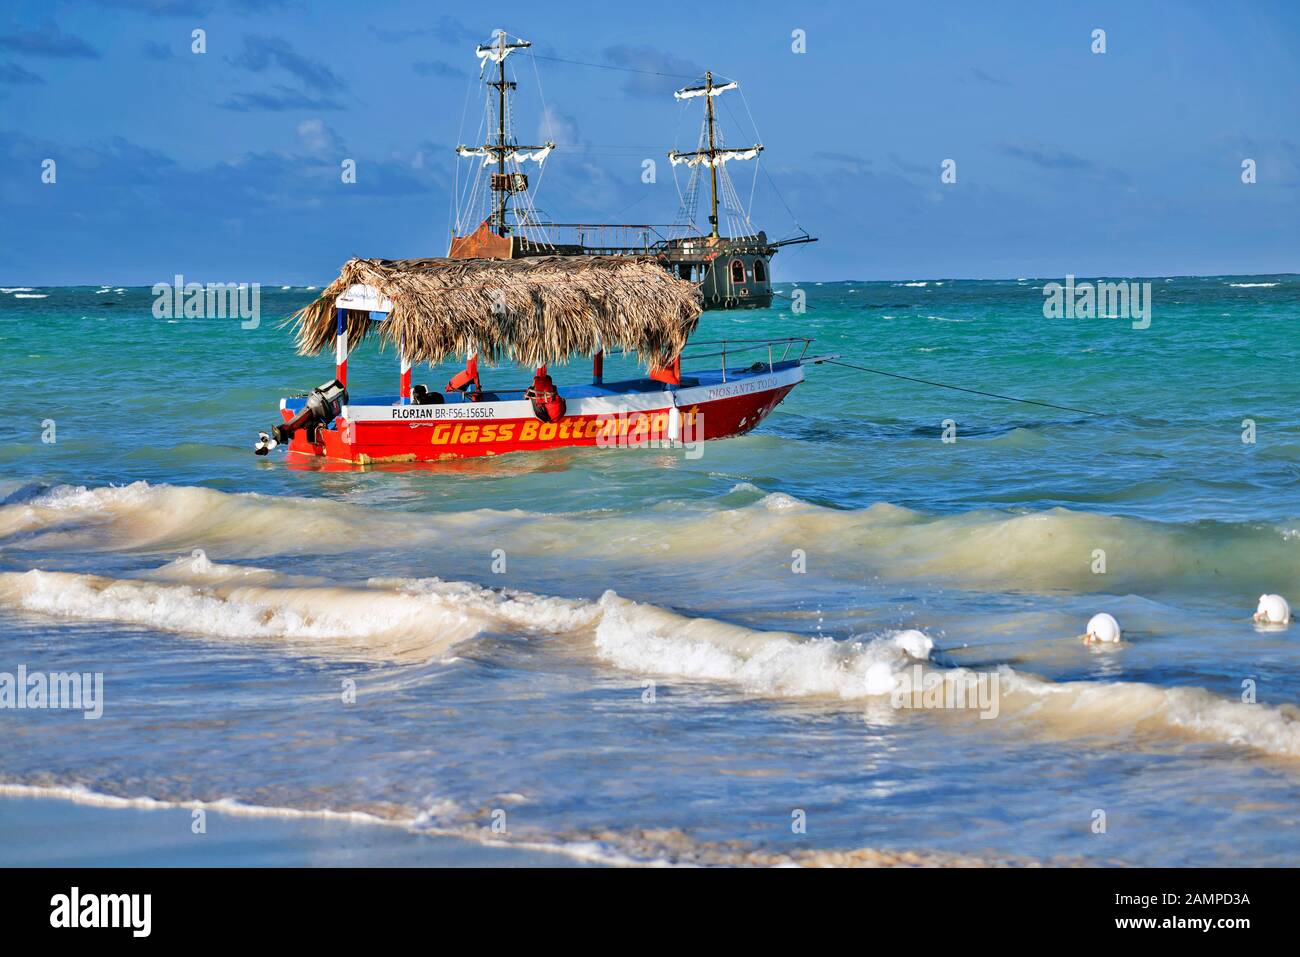 Red glass bottom boat  , Punta Cana; Dominican Republic; Stock Photo